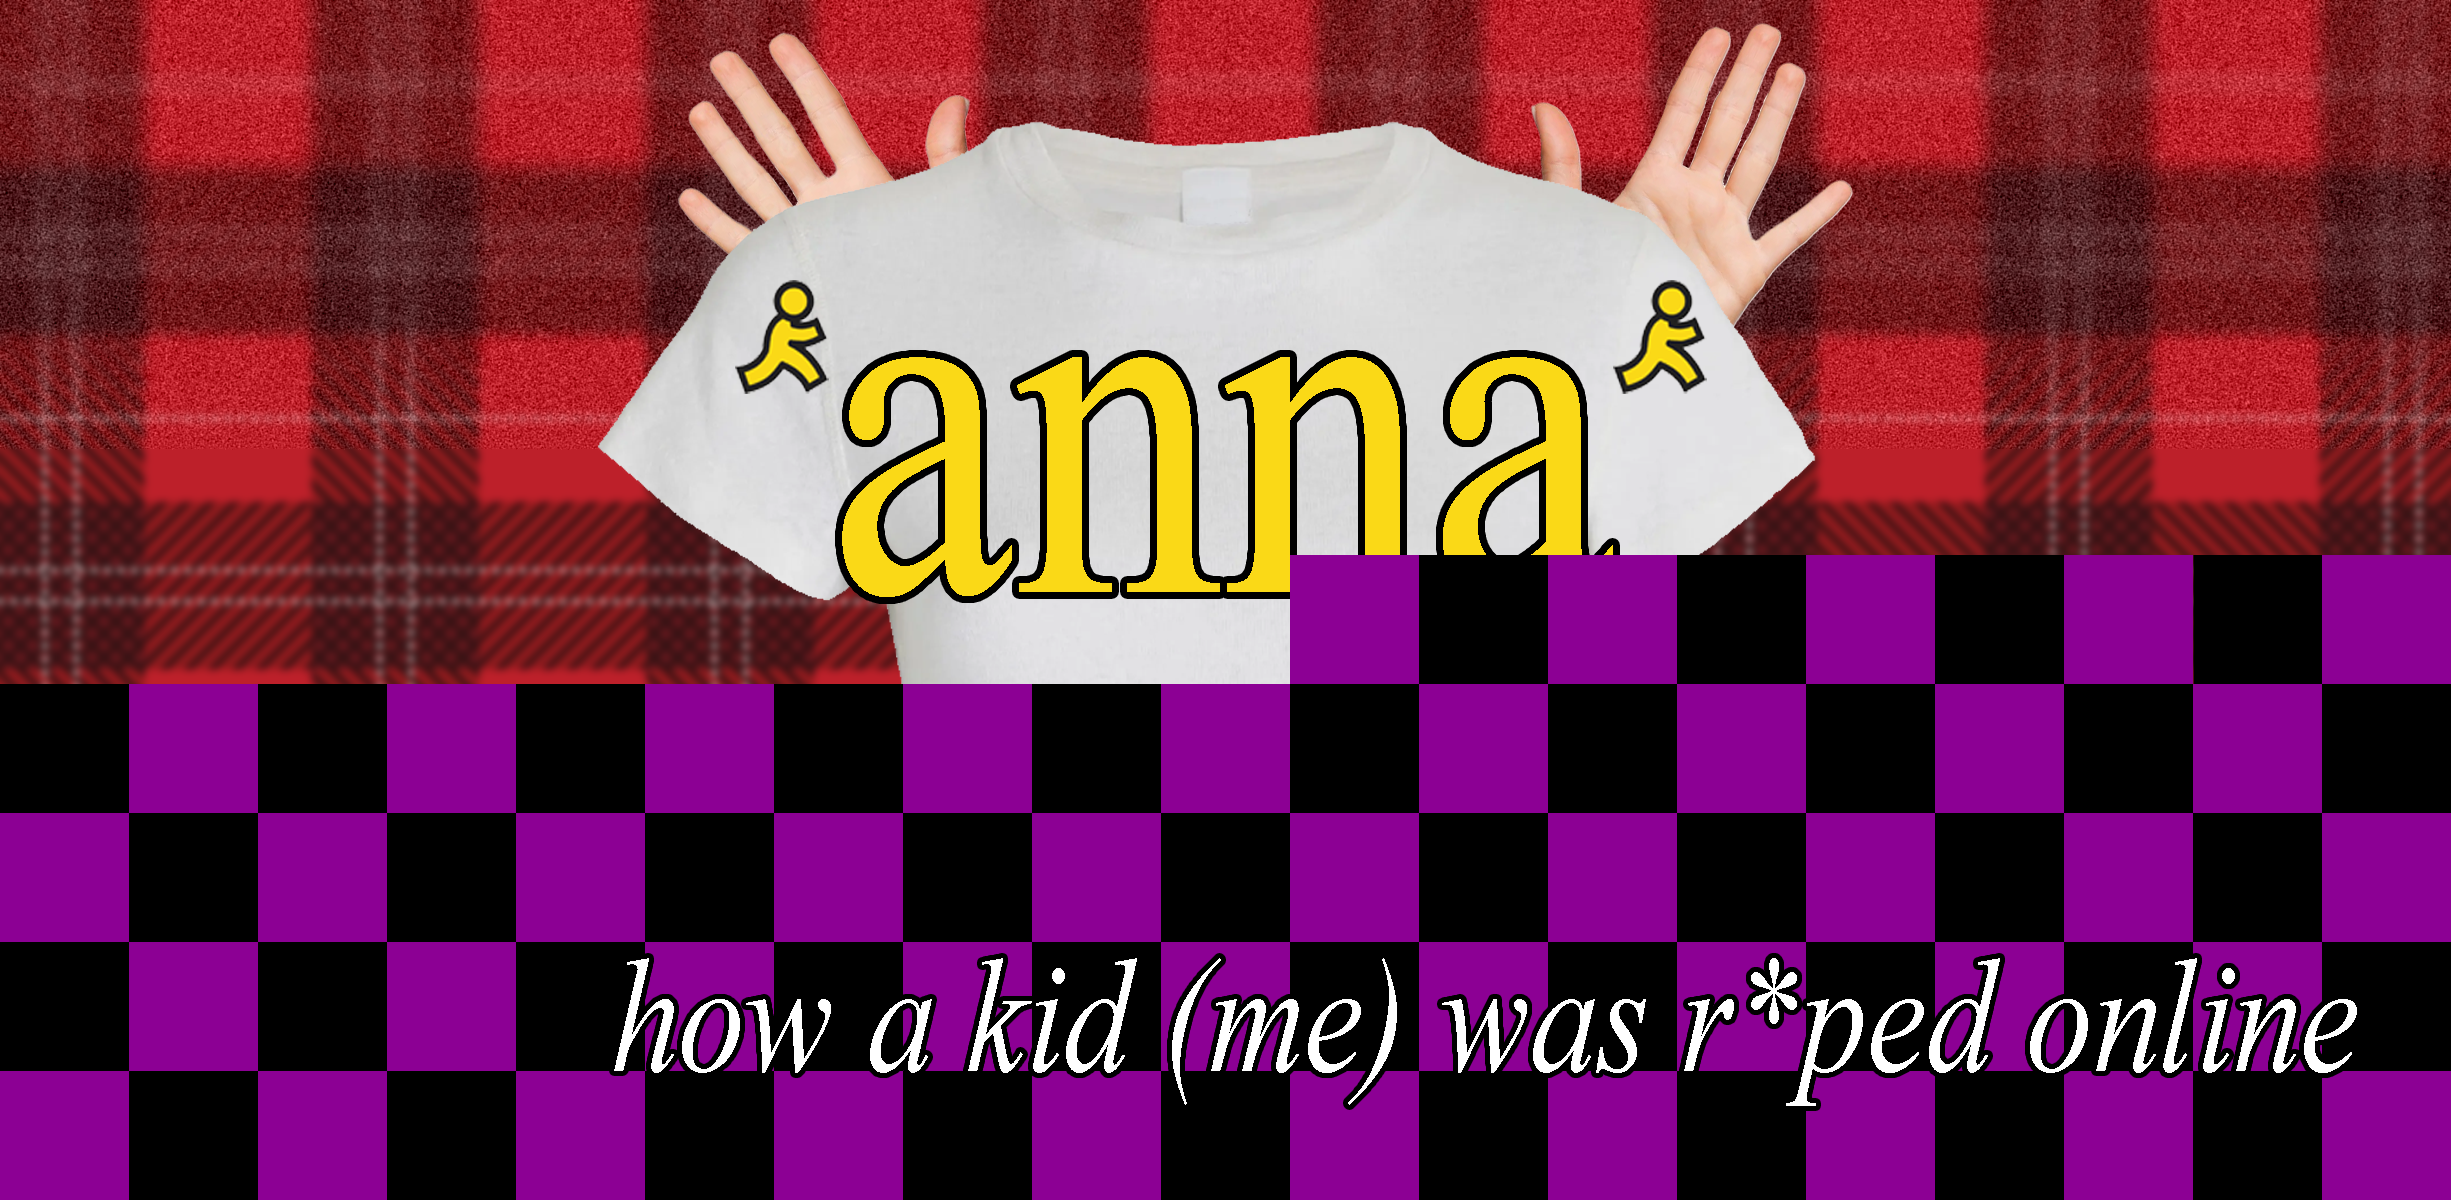 A red tartan background. On top is a white t-shirt for women with the word 'anna' written in yellow letters. Behind the shirt's shoulders, spread hands stick out. The bottom half of the image is covered with a purple and black checkerboard. On the checkerboard in white italic letters is written 'How a kid (me) was raped online'